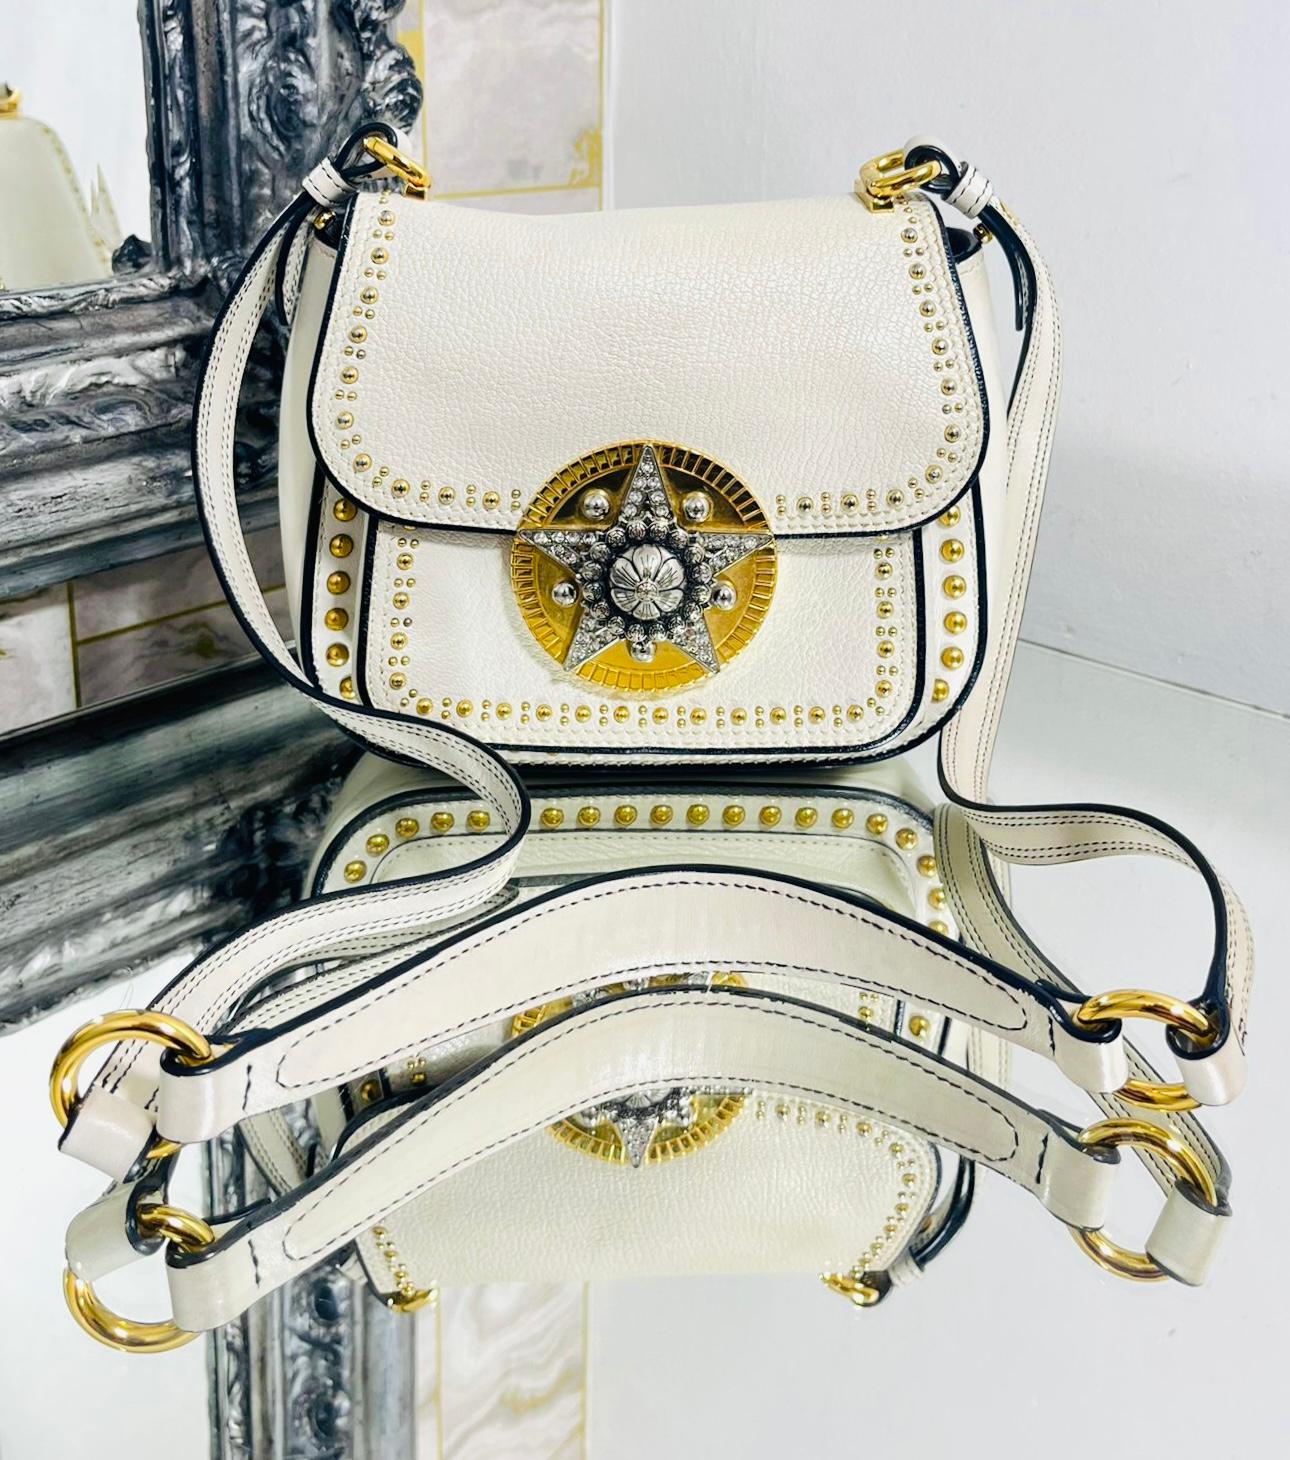 Miu Miu Dahlia Star Leather Crossbody Bag

White bag designed with gold, crystal lined star decoration to the centre and metal studs along the seams.

Featuring front, flap closure and gold 'Miu Miu' logo to rear.

Styled with long, shoulder strap,